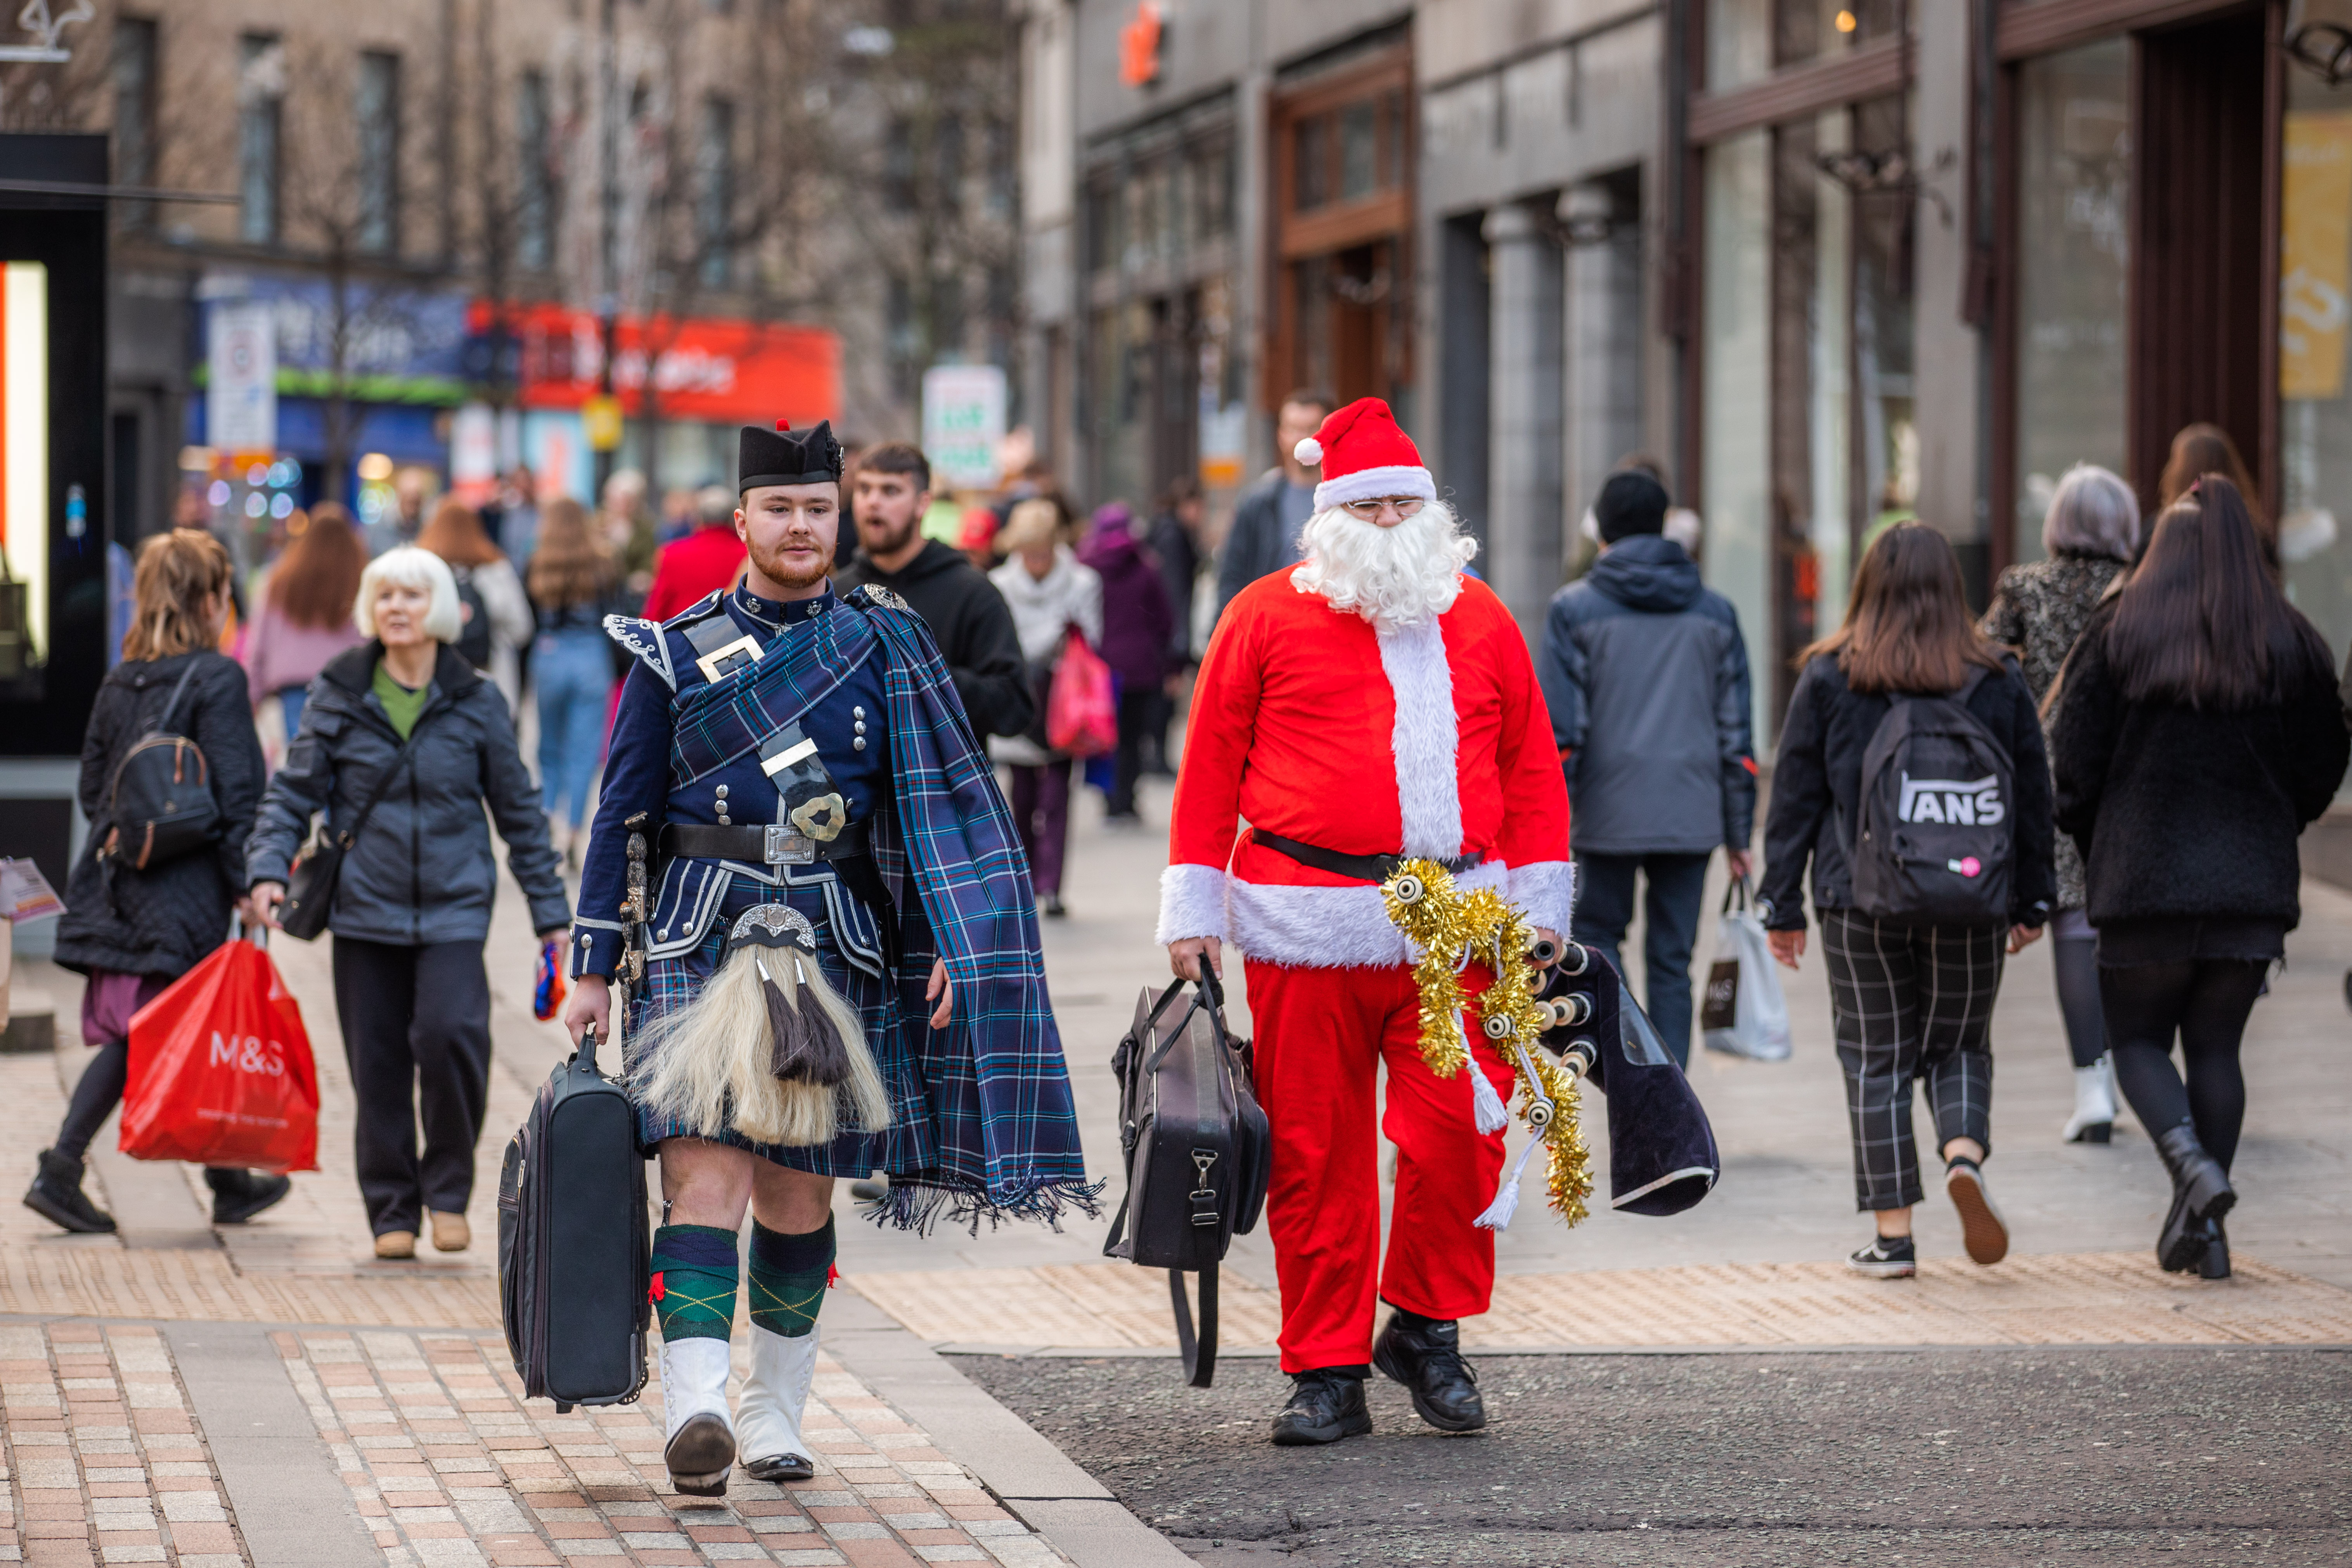 Dundee City Centre was inundated with Christmas shoppers at the weekend.